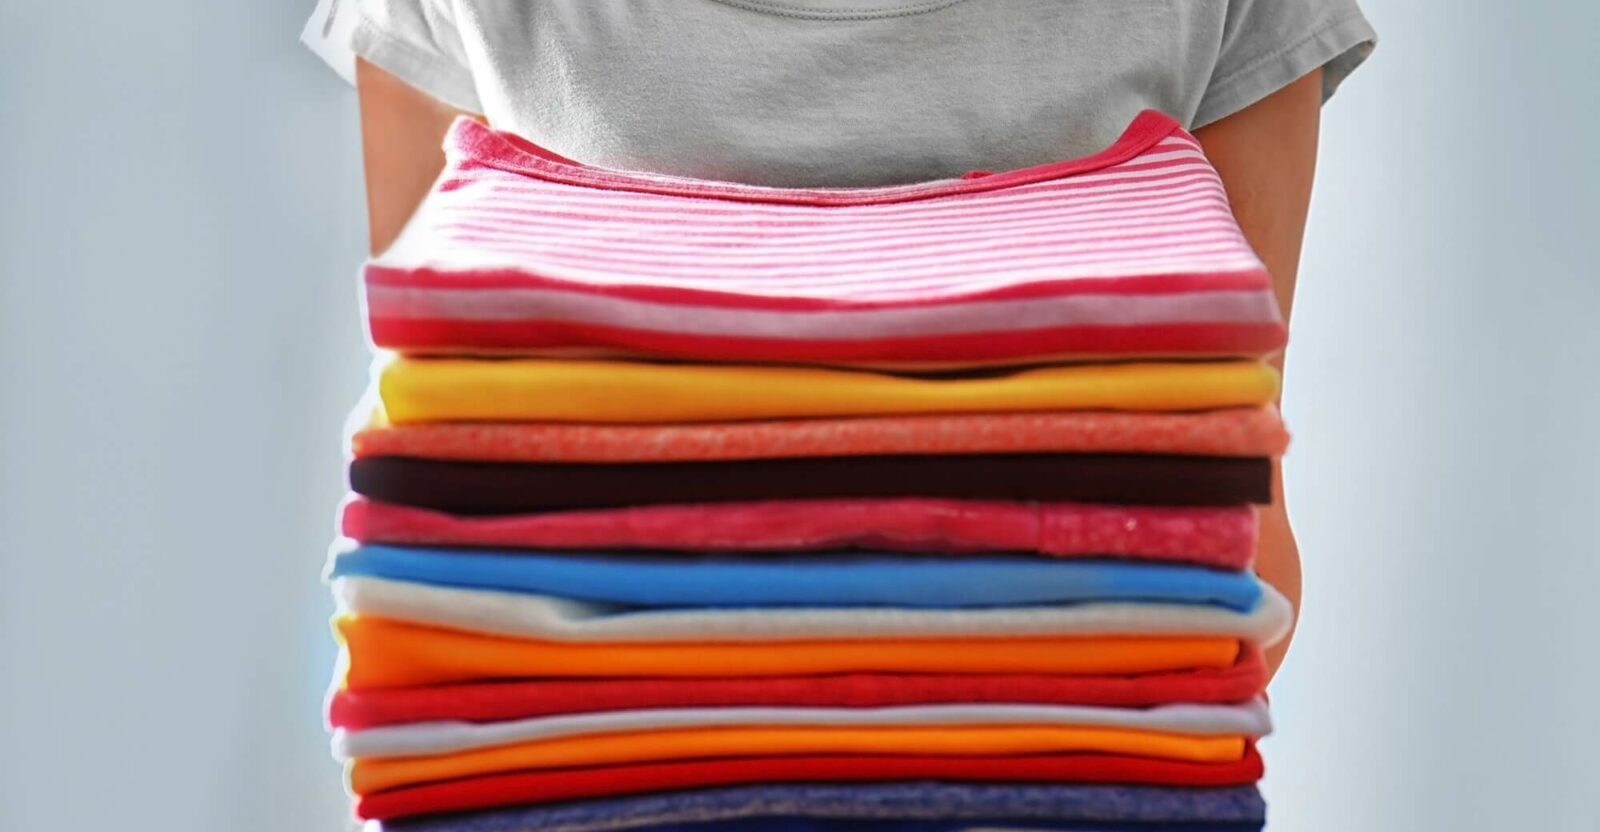 How To Clean Shirts Without Washing? - Clean House Fast